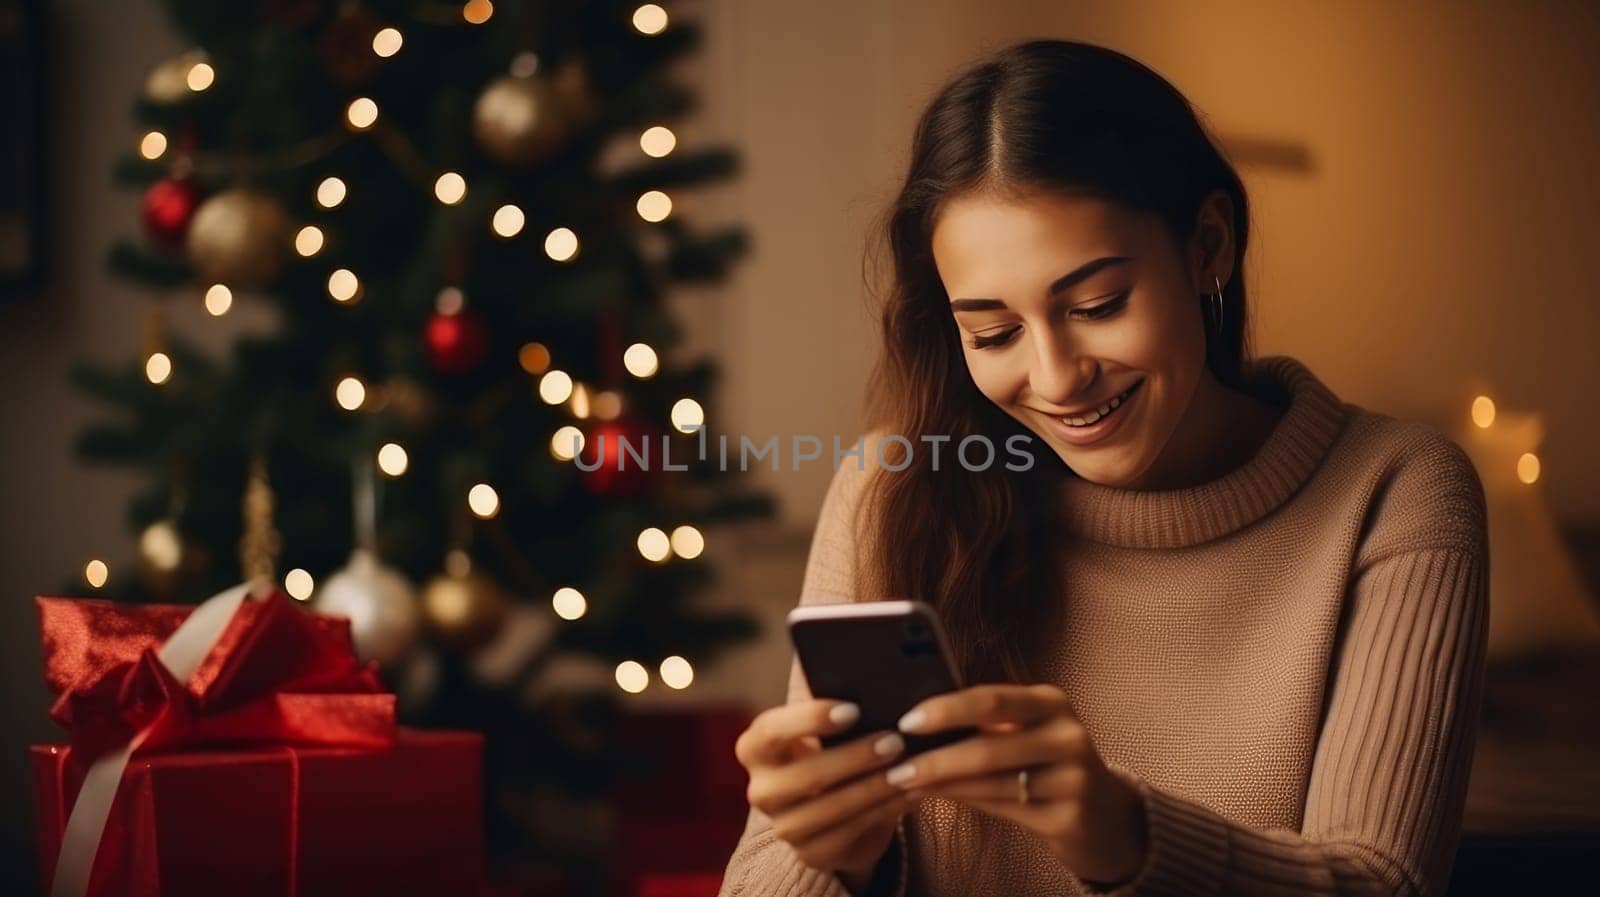 Young woman orders New Year gifts during Christmas holidays at home using smartphone and credit card by Alla_Yurtayeva